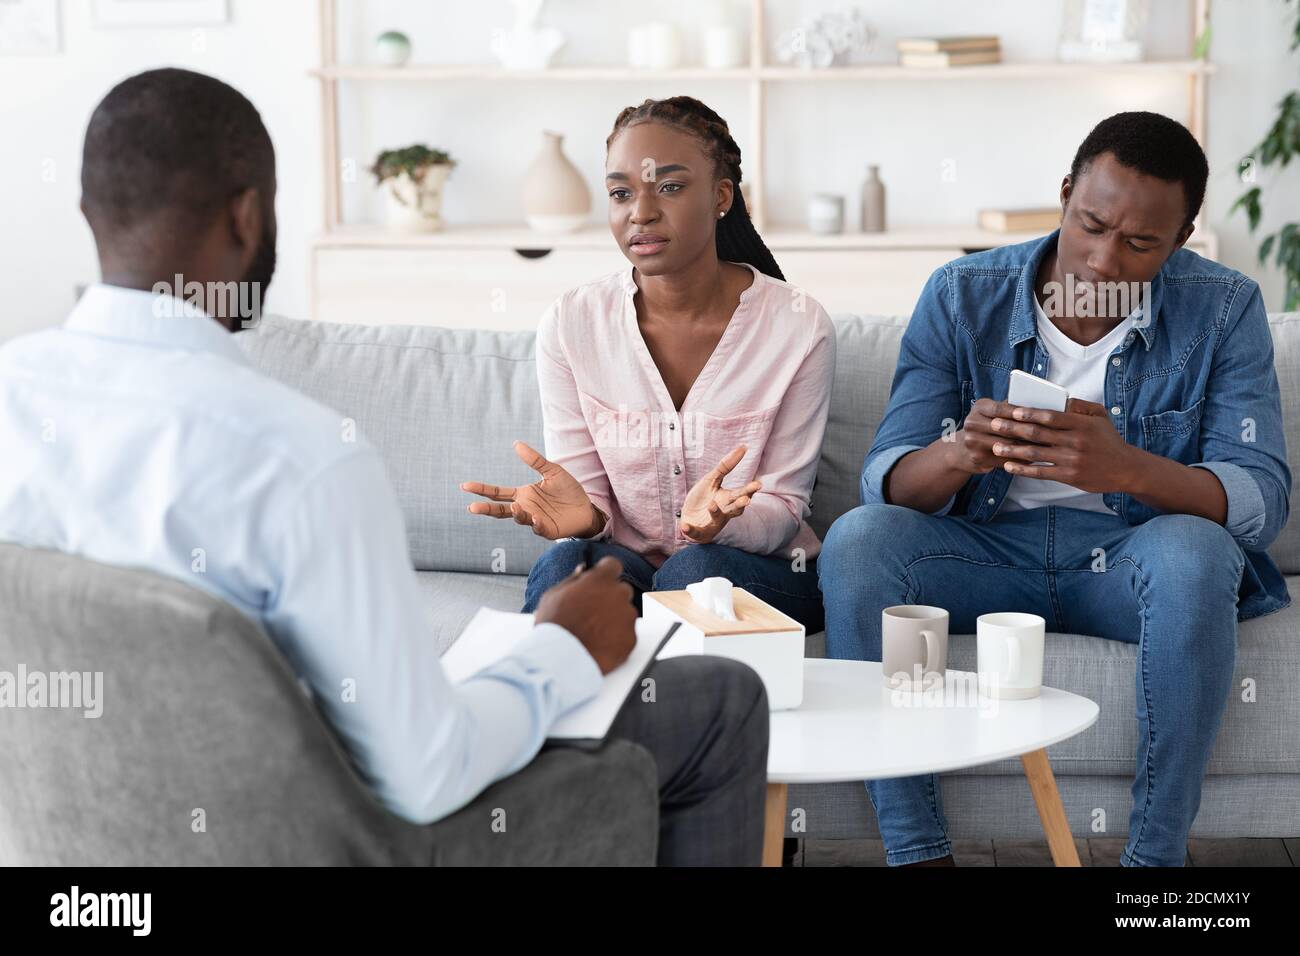 Displeased black woman blaming husband at psychologist consultation, complaining about smartphone addiction Stock Photo